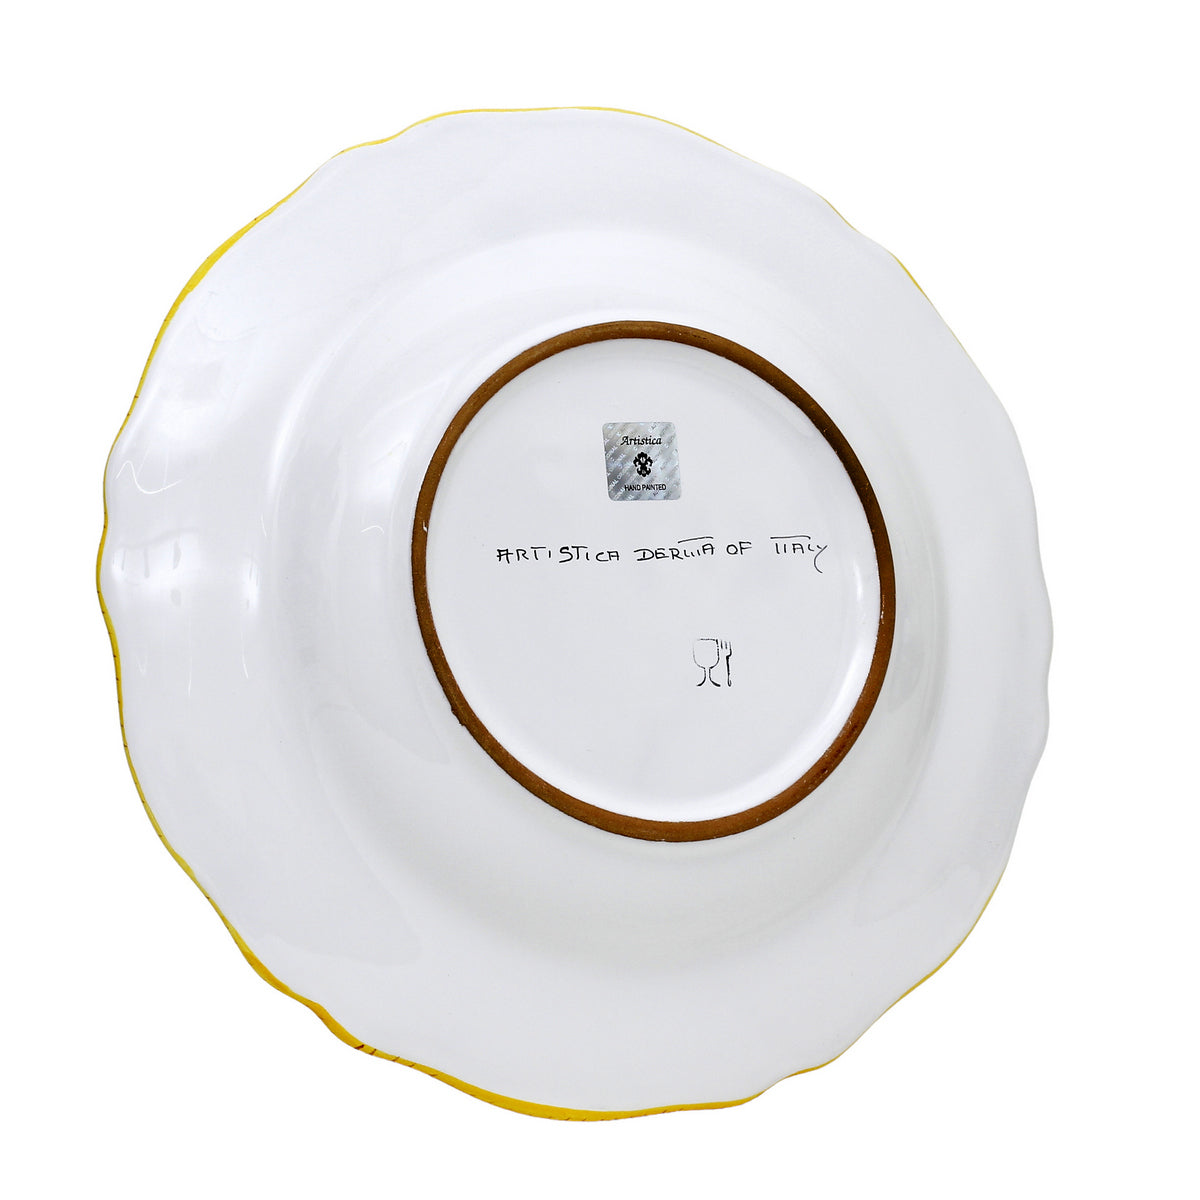 GIFT BOX: With Deruta Dinner Plate - LIMONCINI design (4 Pcs)